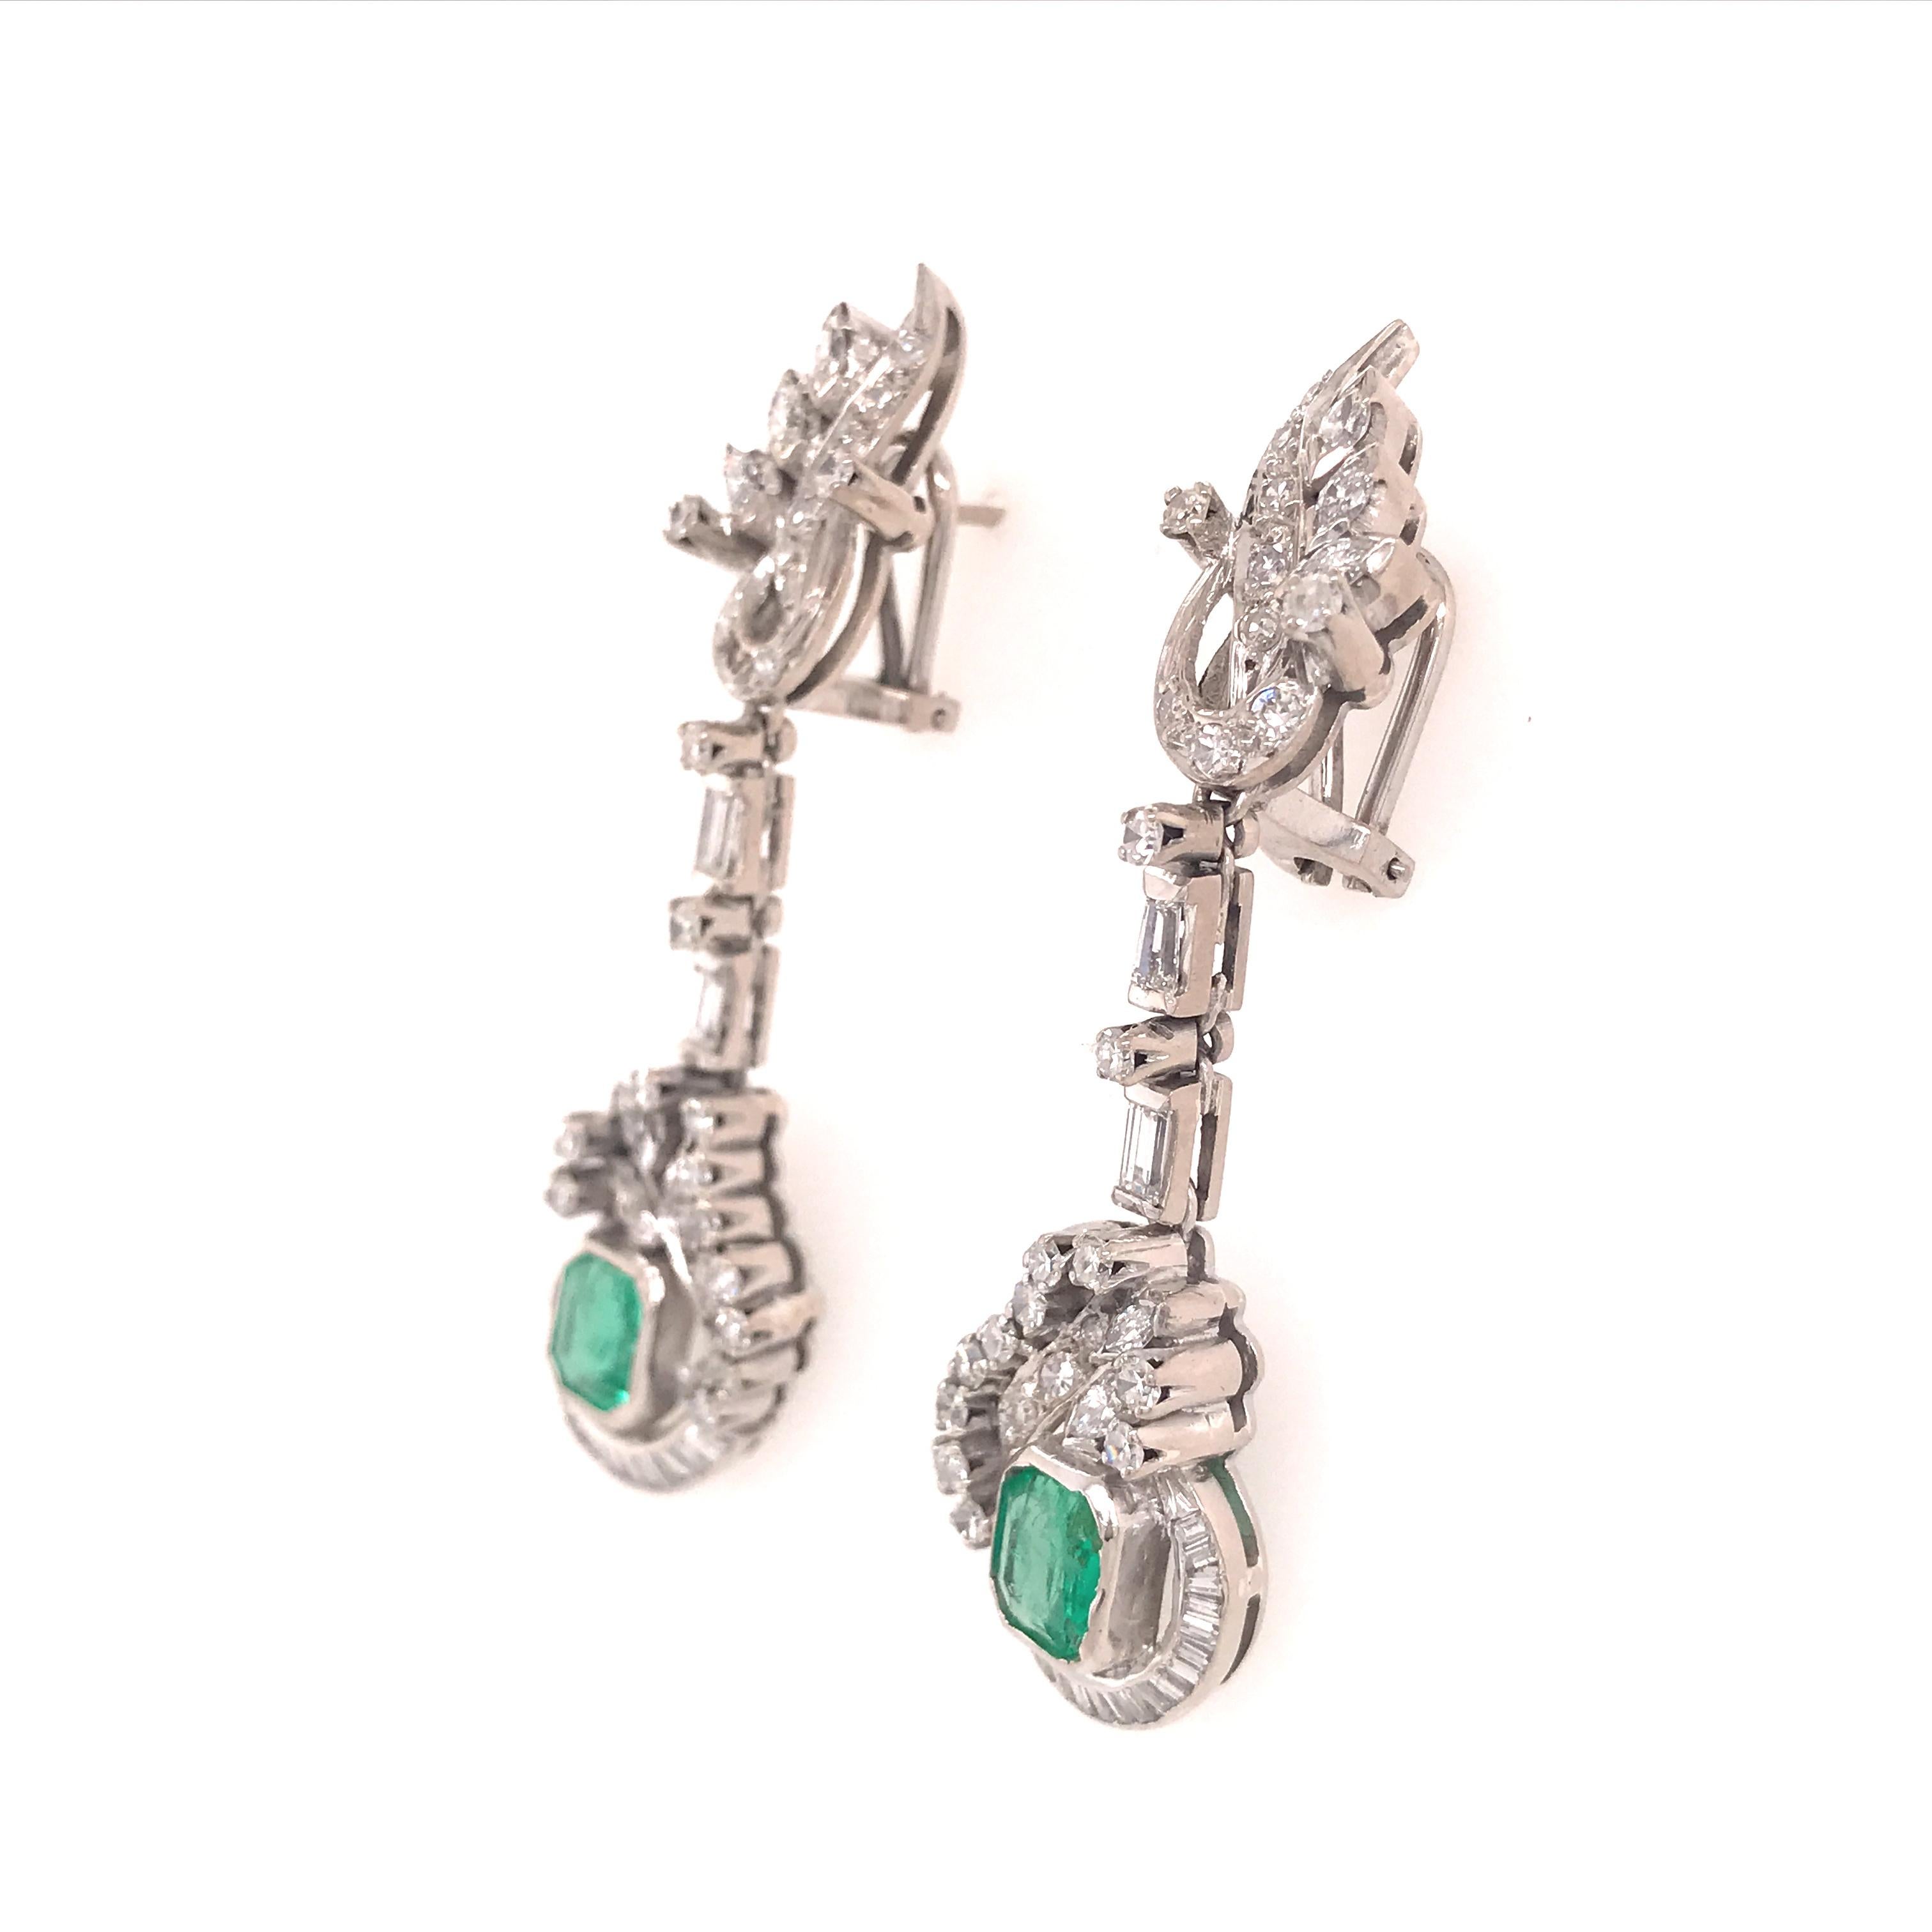 Edwardian Diamond and Emerald Earring in Sterling Silver and 10K White Gold.  (10) Marquise Diamonds, (52) Round Brilliant Cut and (40) Baguette Diamonds weighing 2.20 carat total weight, G-I in color, VS-SI in clarity and (2) Emeralds weighing